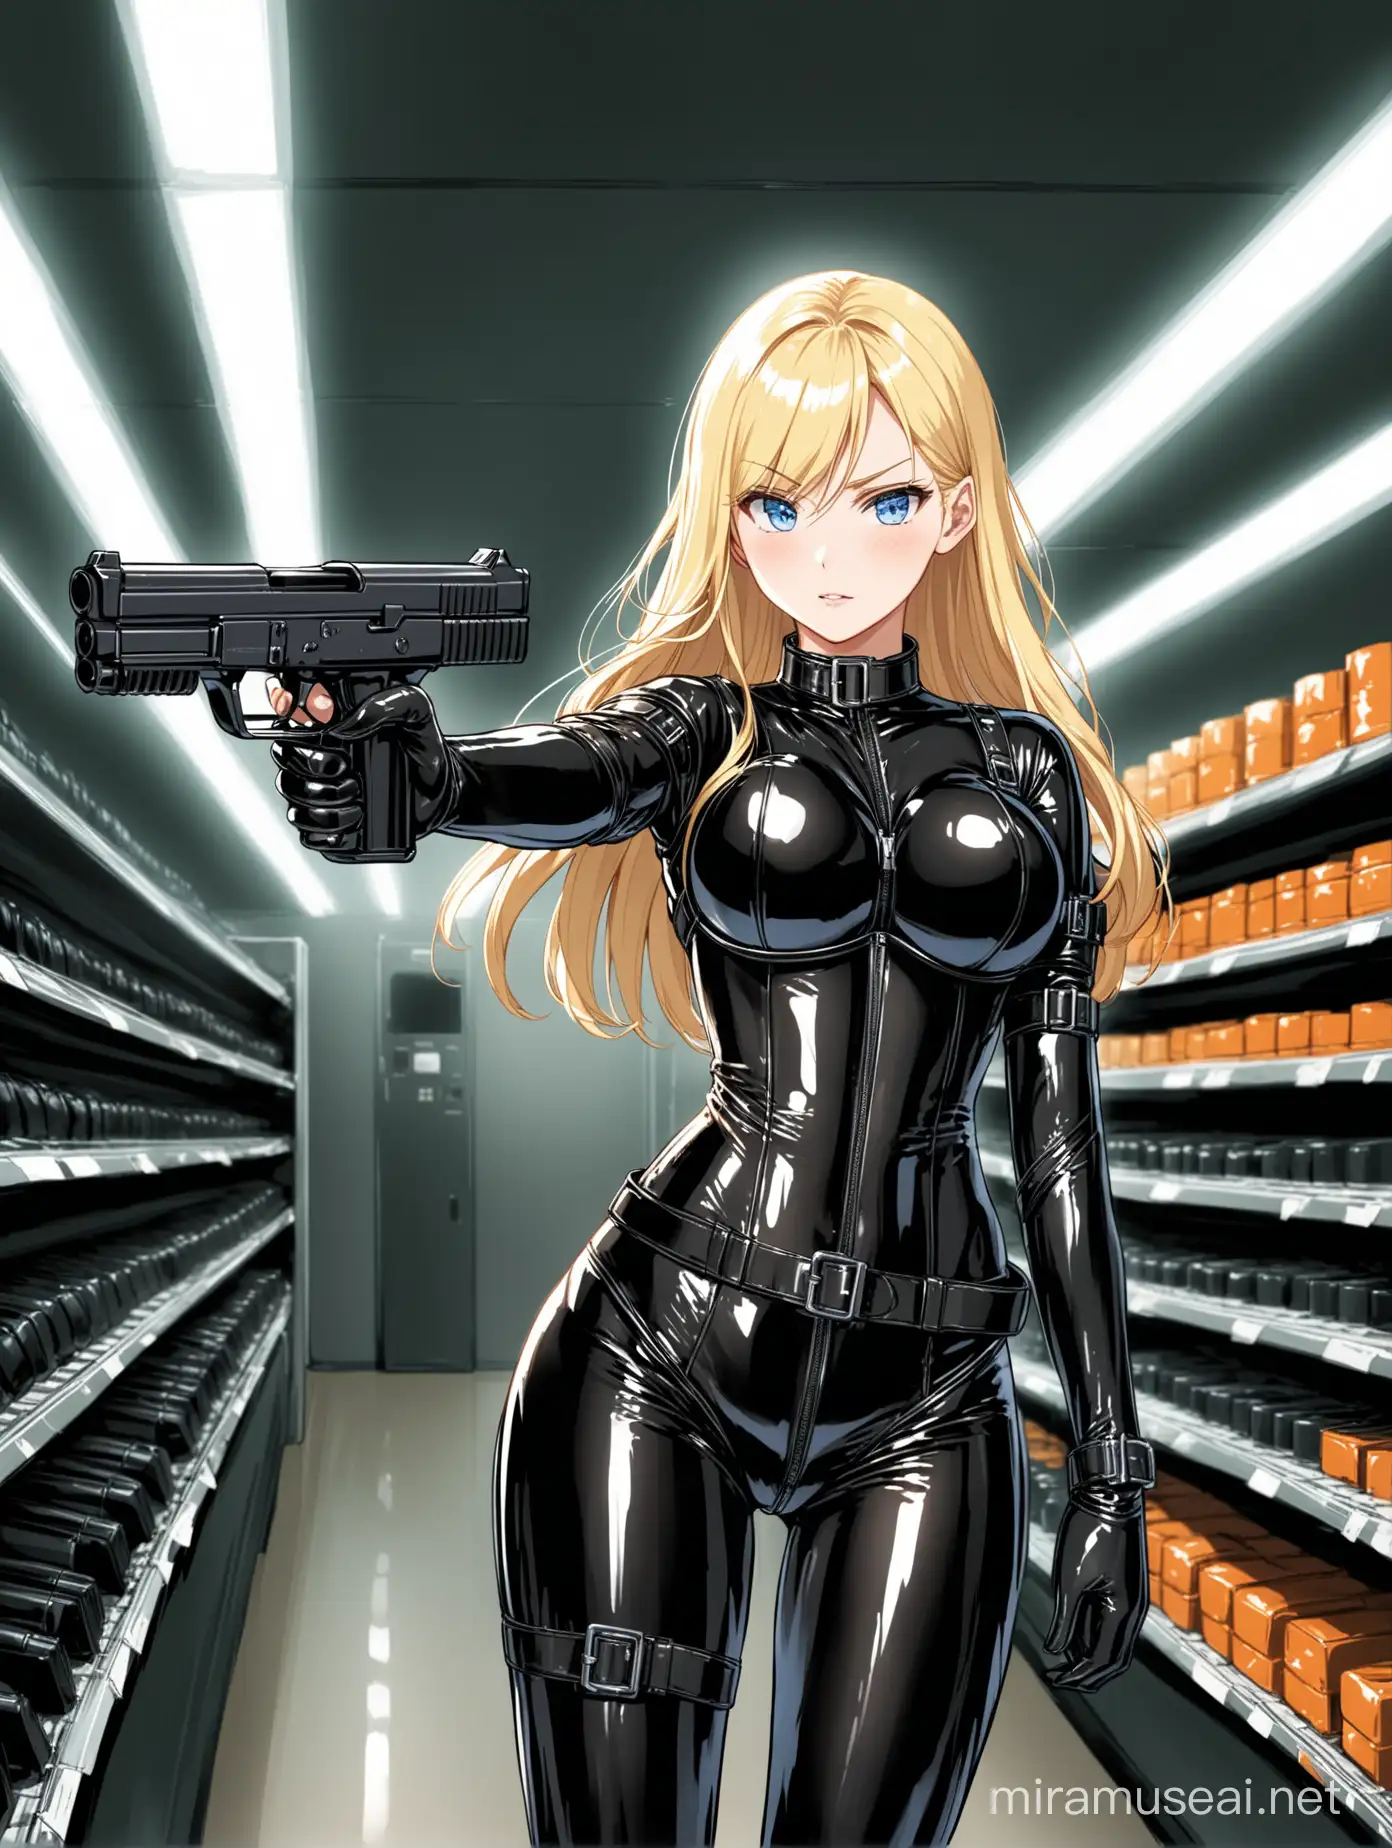 A pretty blond hair woman, assassin, shoulder length hair, blue eyes. holding s uzi 9mm both hands, aiming., standing upright. action pose. wearing a glossy black catsuit. neck collar, fetish corset. long gloves, arm straps. many belts. thigh straps. heavy rubber outfit. fetish wear. solo. ginning, inside a convenience store.